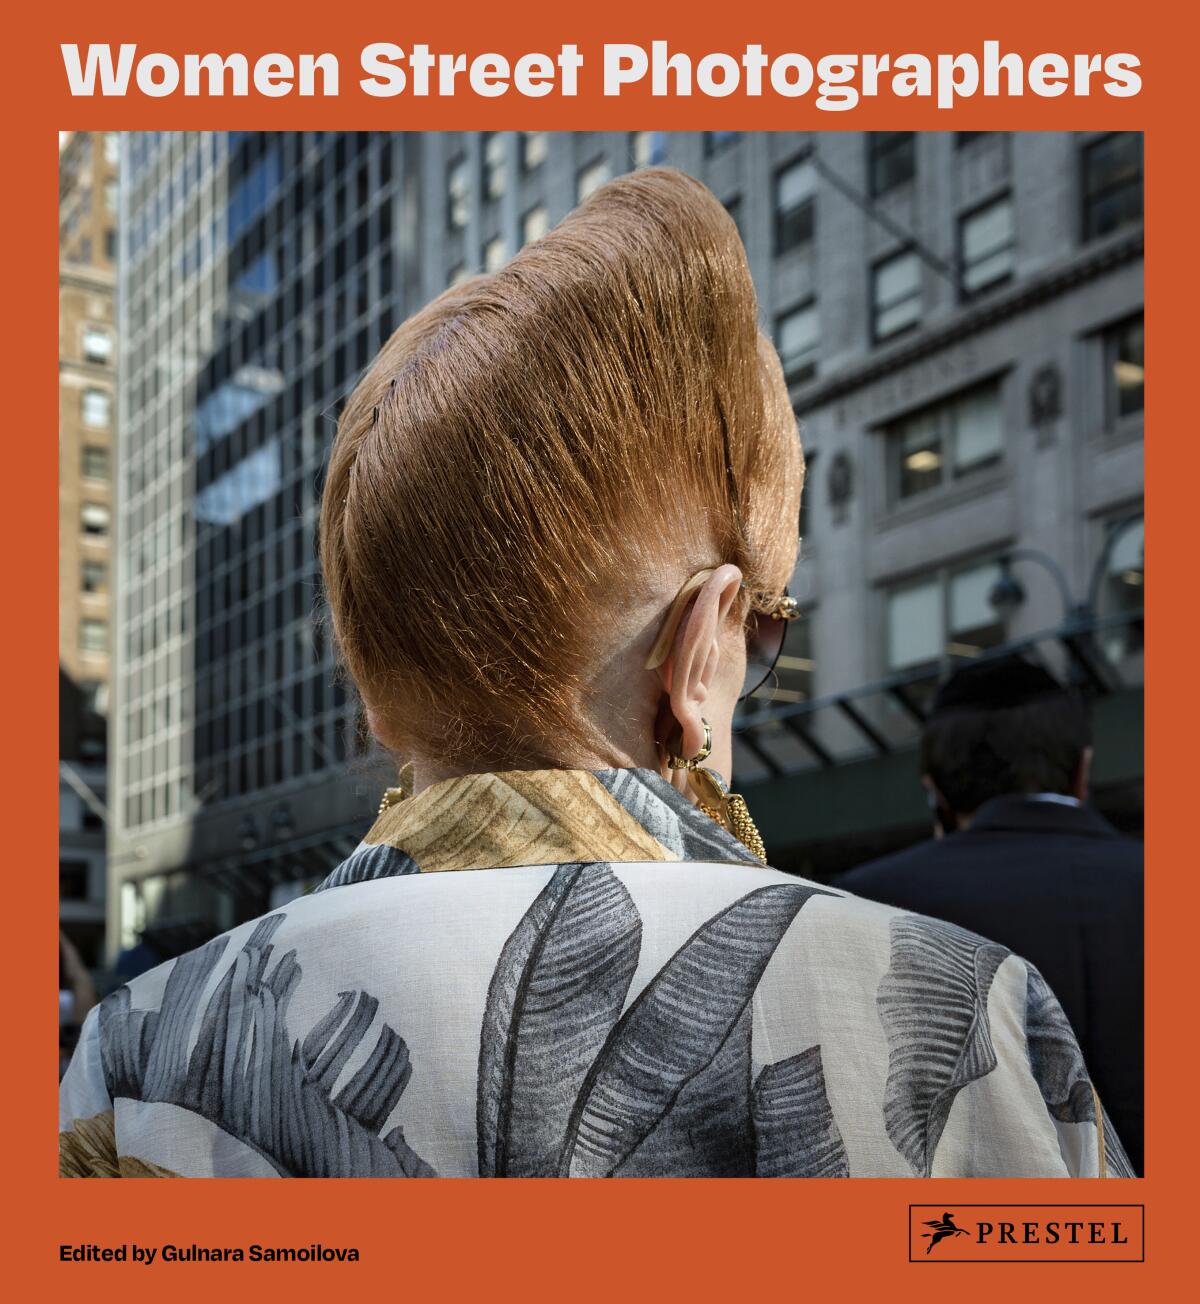 This cover image released by Prestel shows "Women Street Photographers," a collection of photos edited by Gulnara Samoilova. (Prestel via AP)